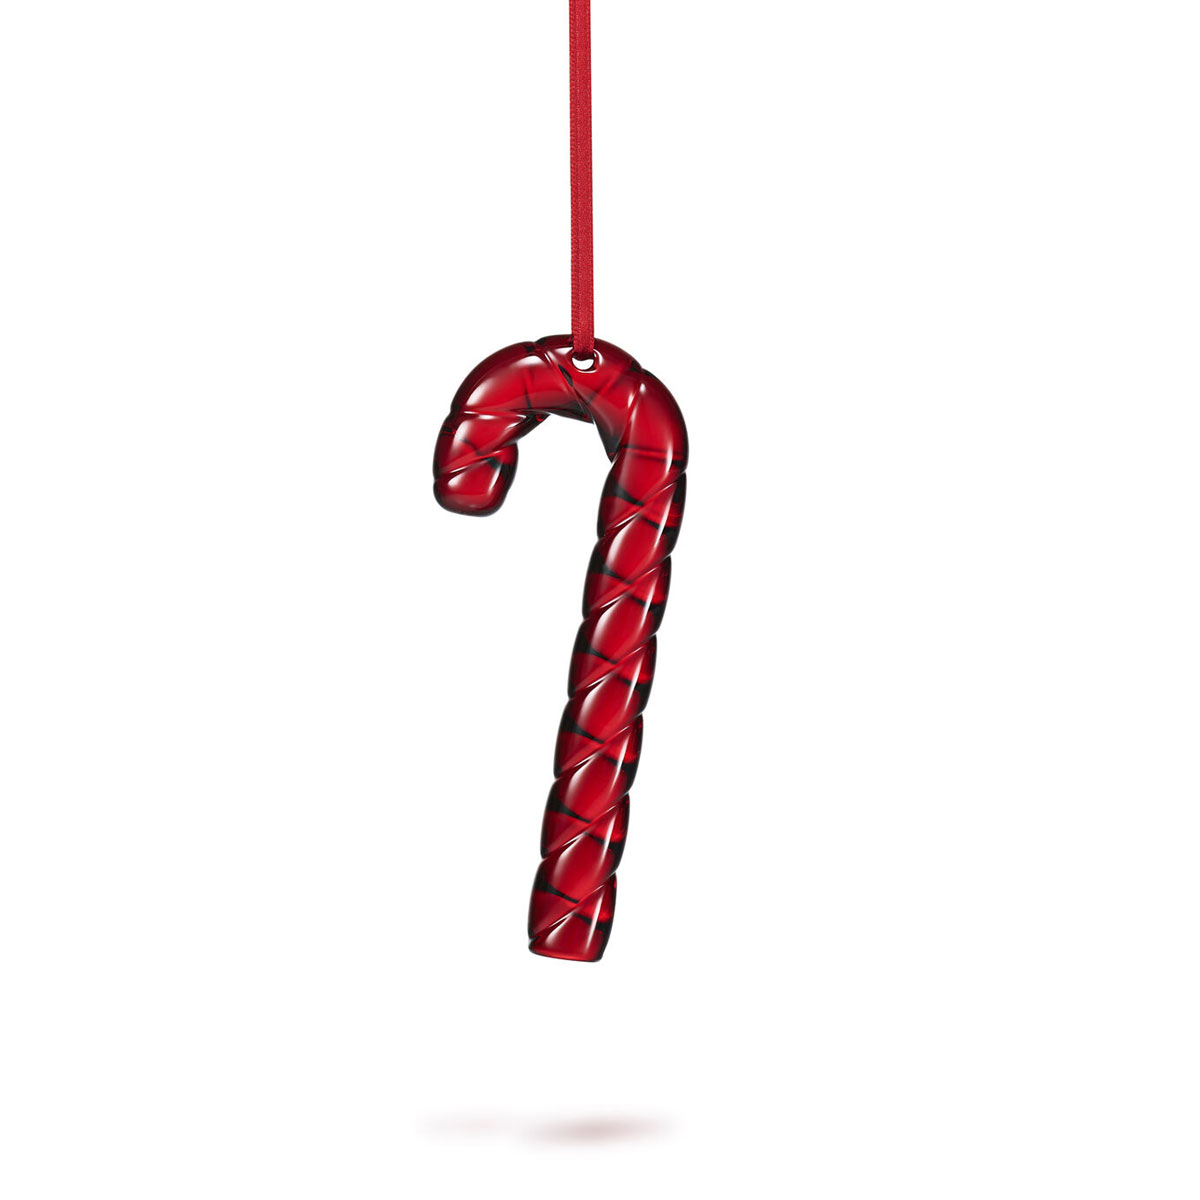 Baccarat Crystal Candy Cane Ornament, Red